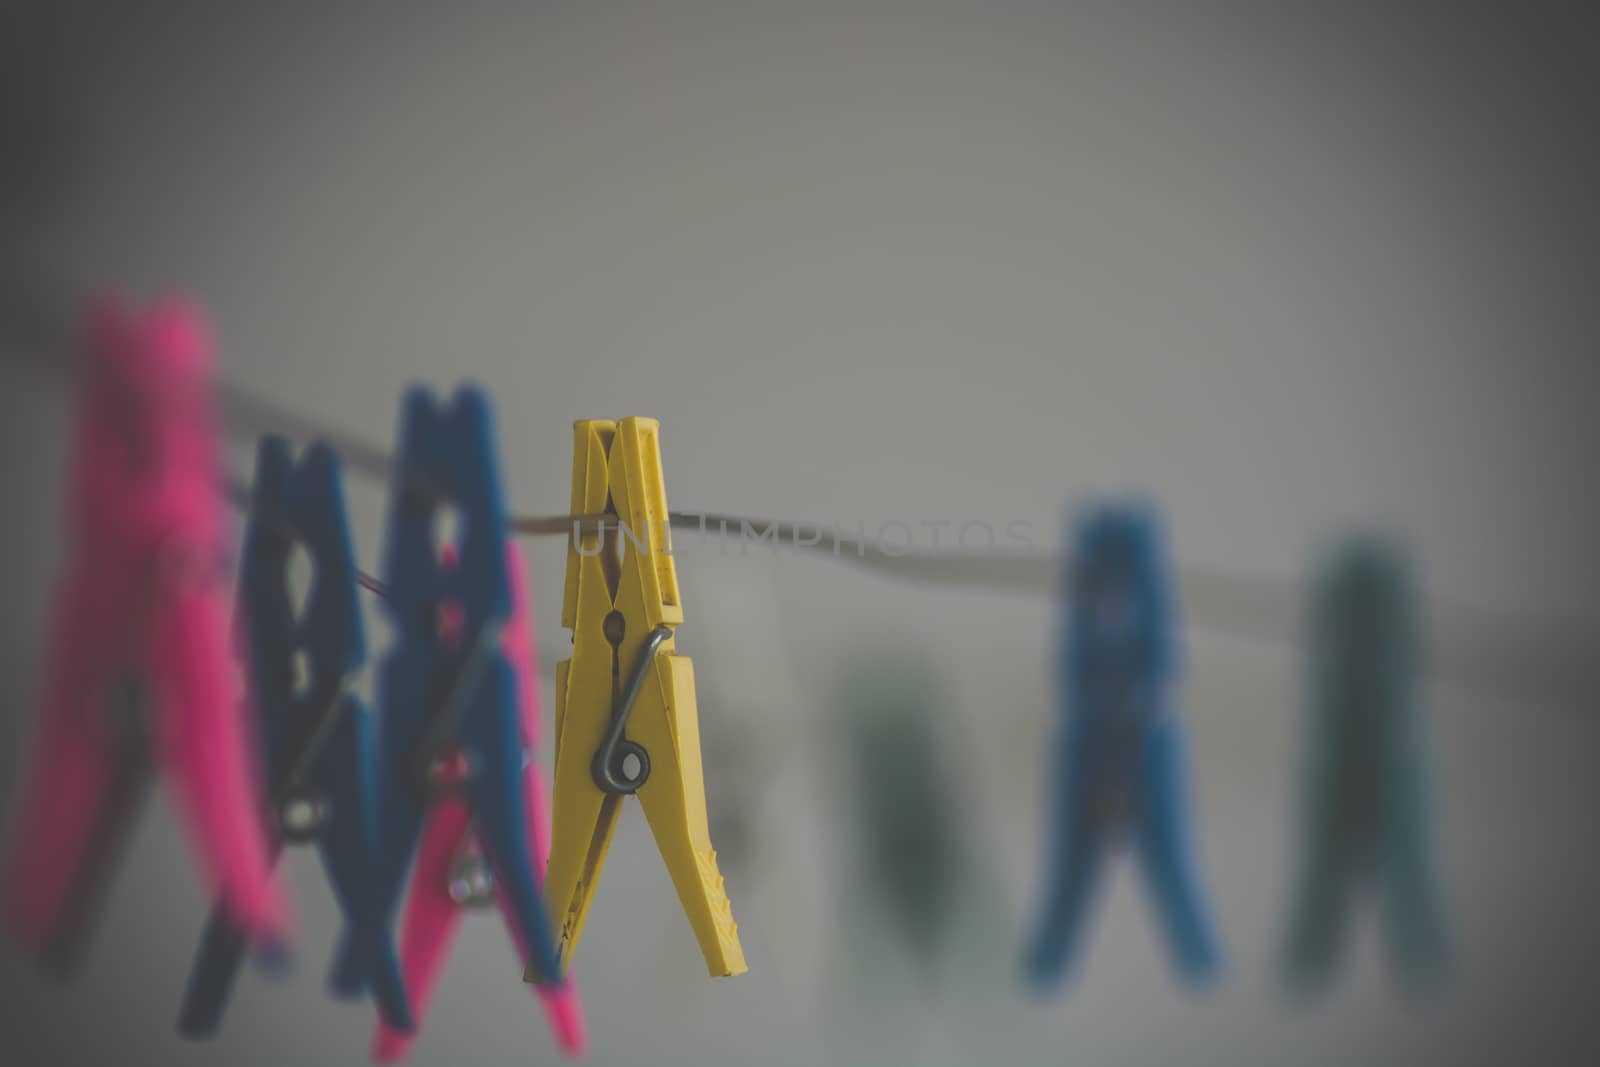 Many pegs for laundry bundled together with the yellow peg on focus. by justbrotography